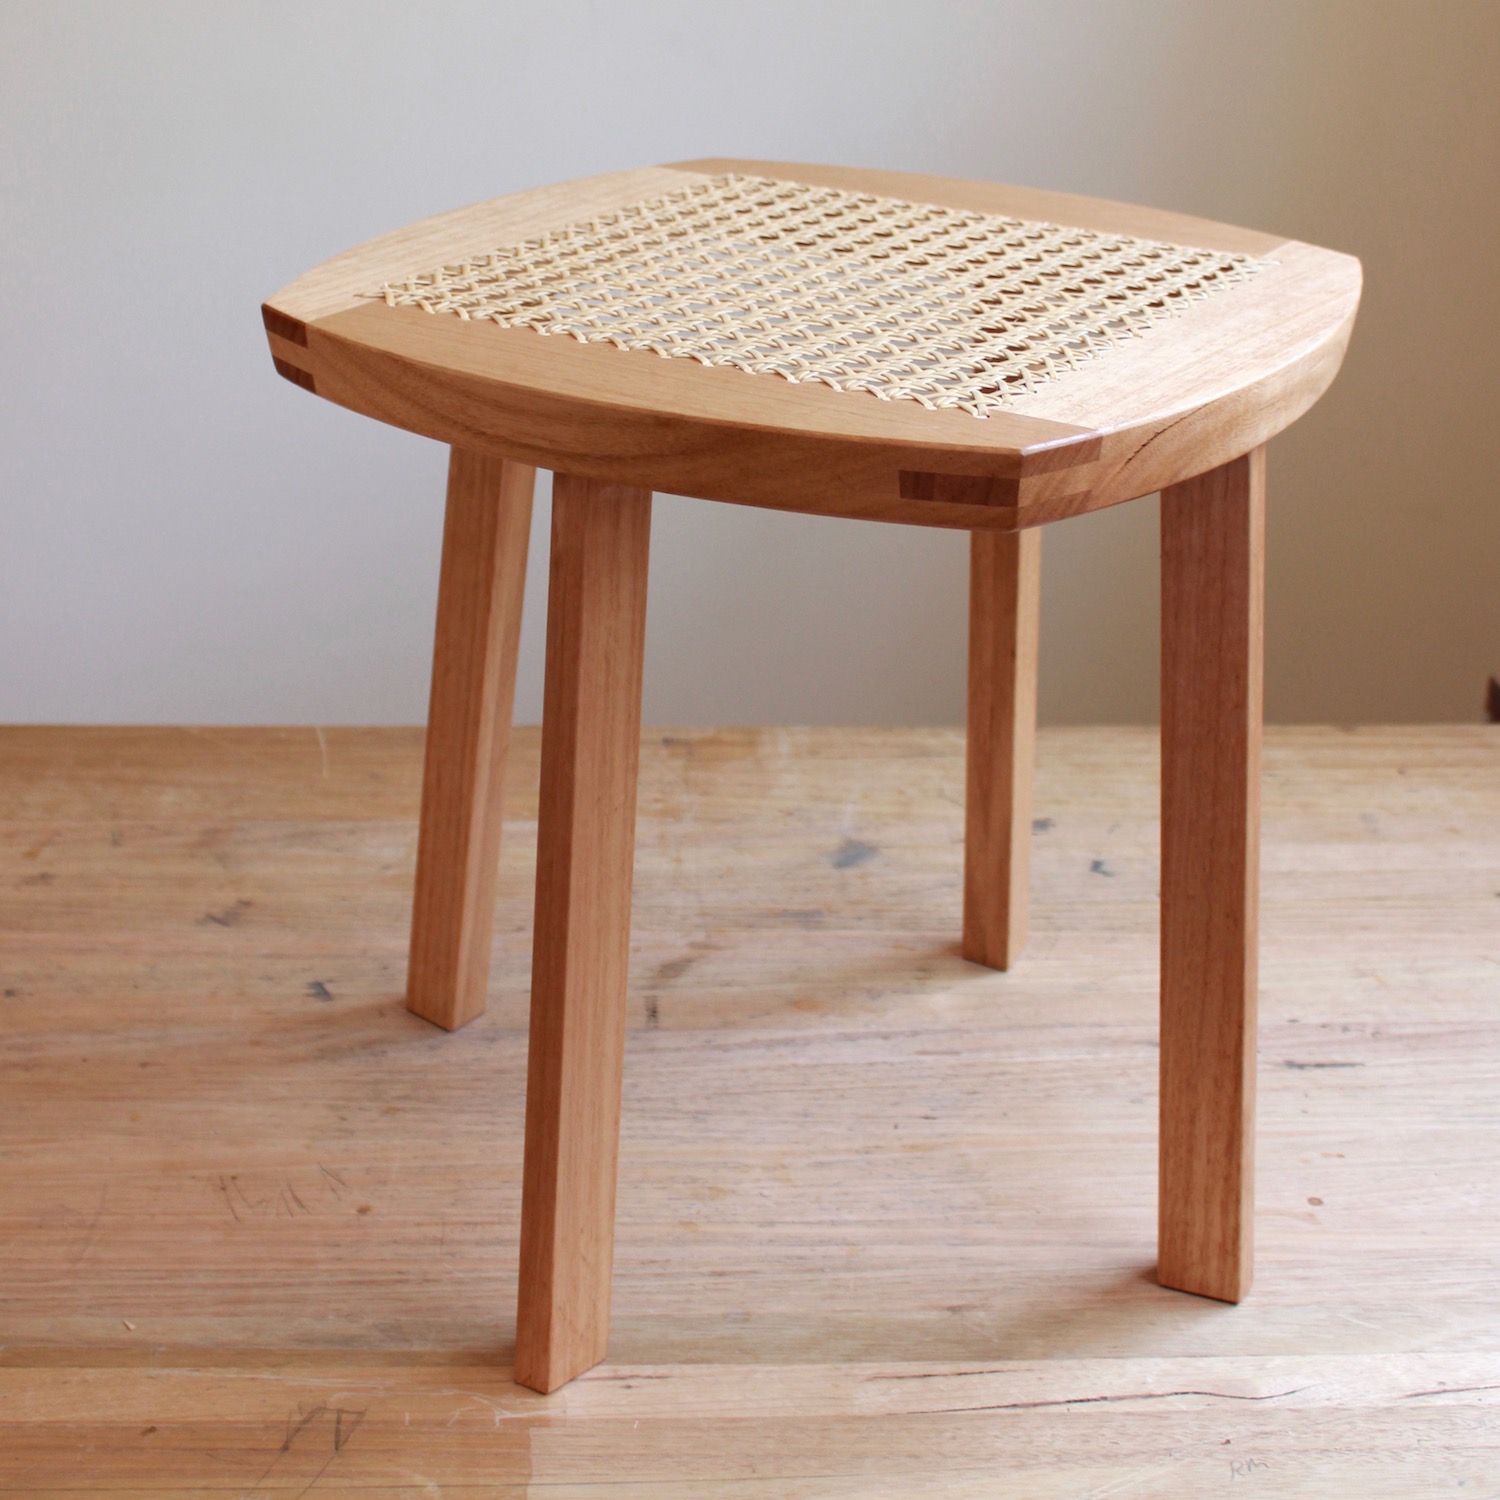 Assemble and Weave a Rattan Cane Stool Image #3